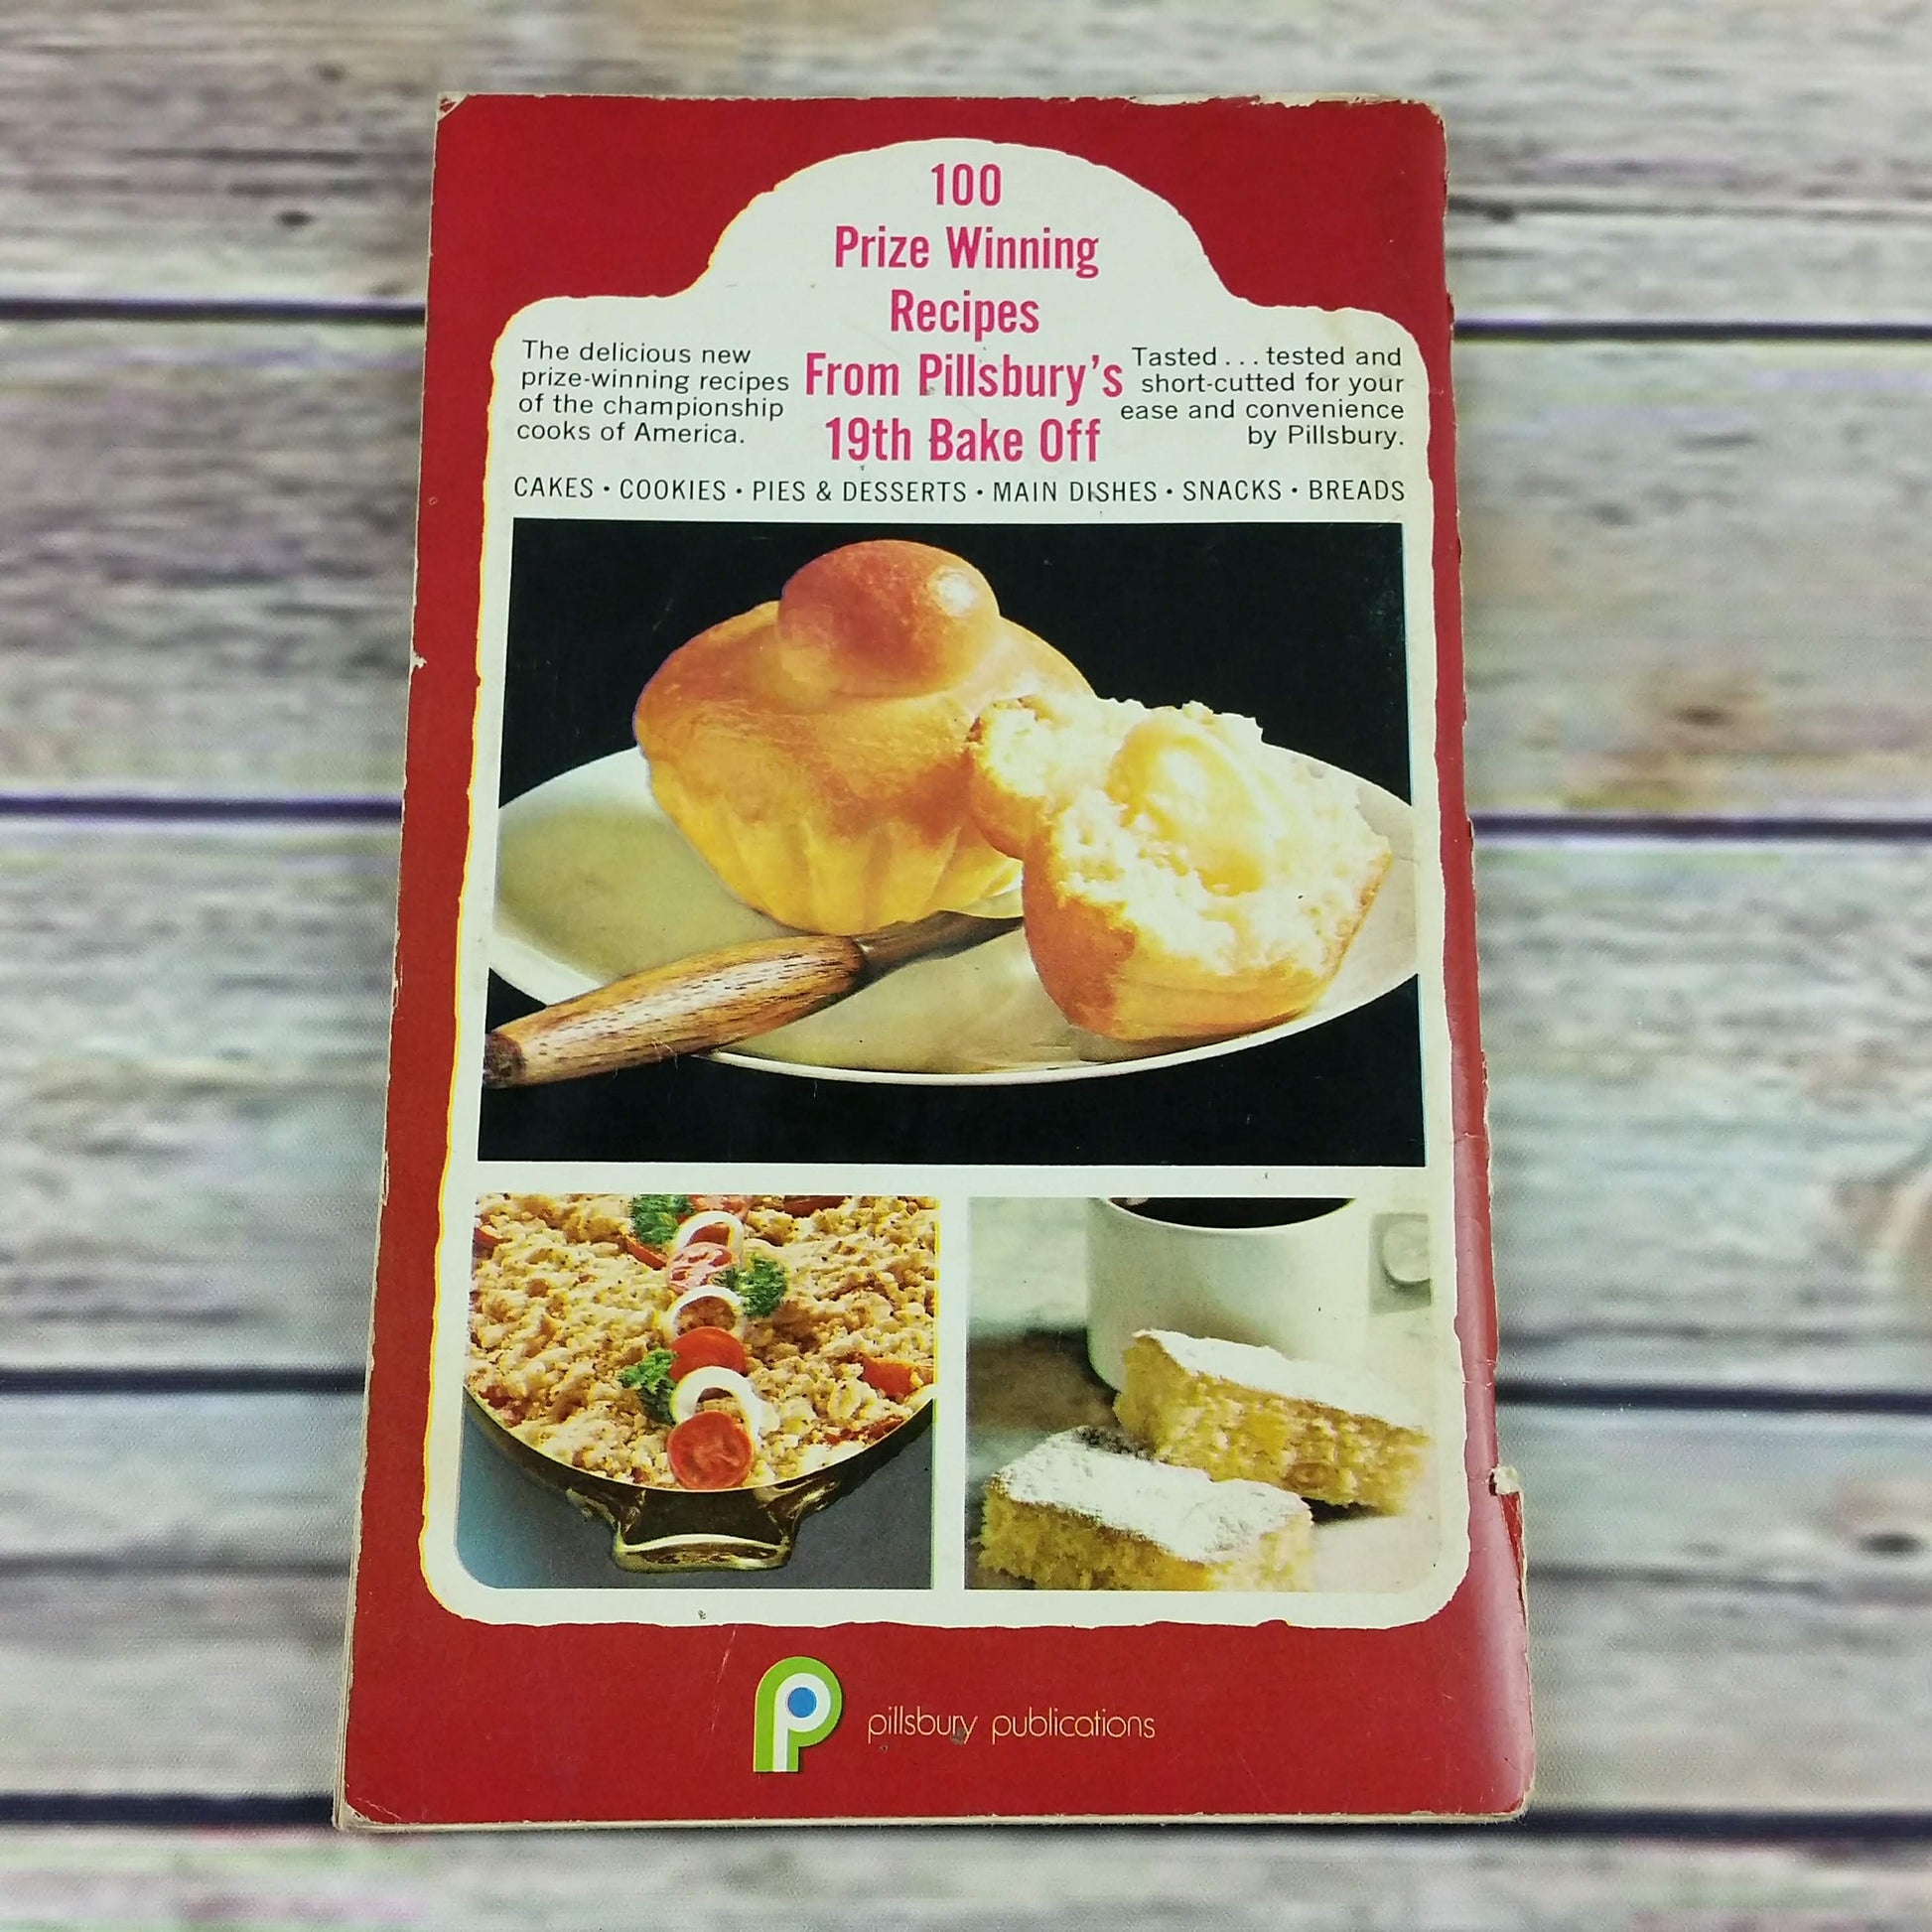 Vintage Cookbook Pillsbury Bake Off Cook Book 19th Annual 100 Recipes 1968 Paperback Booklet - At Grandma's Table